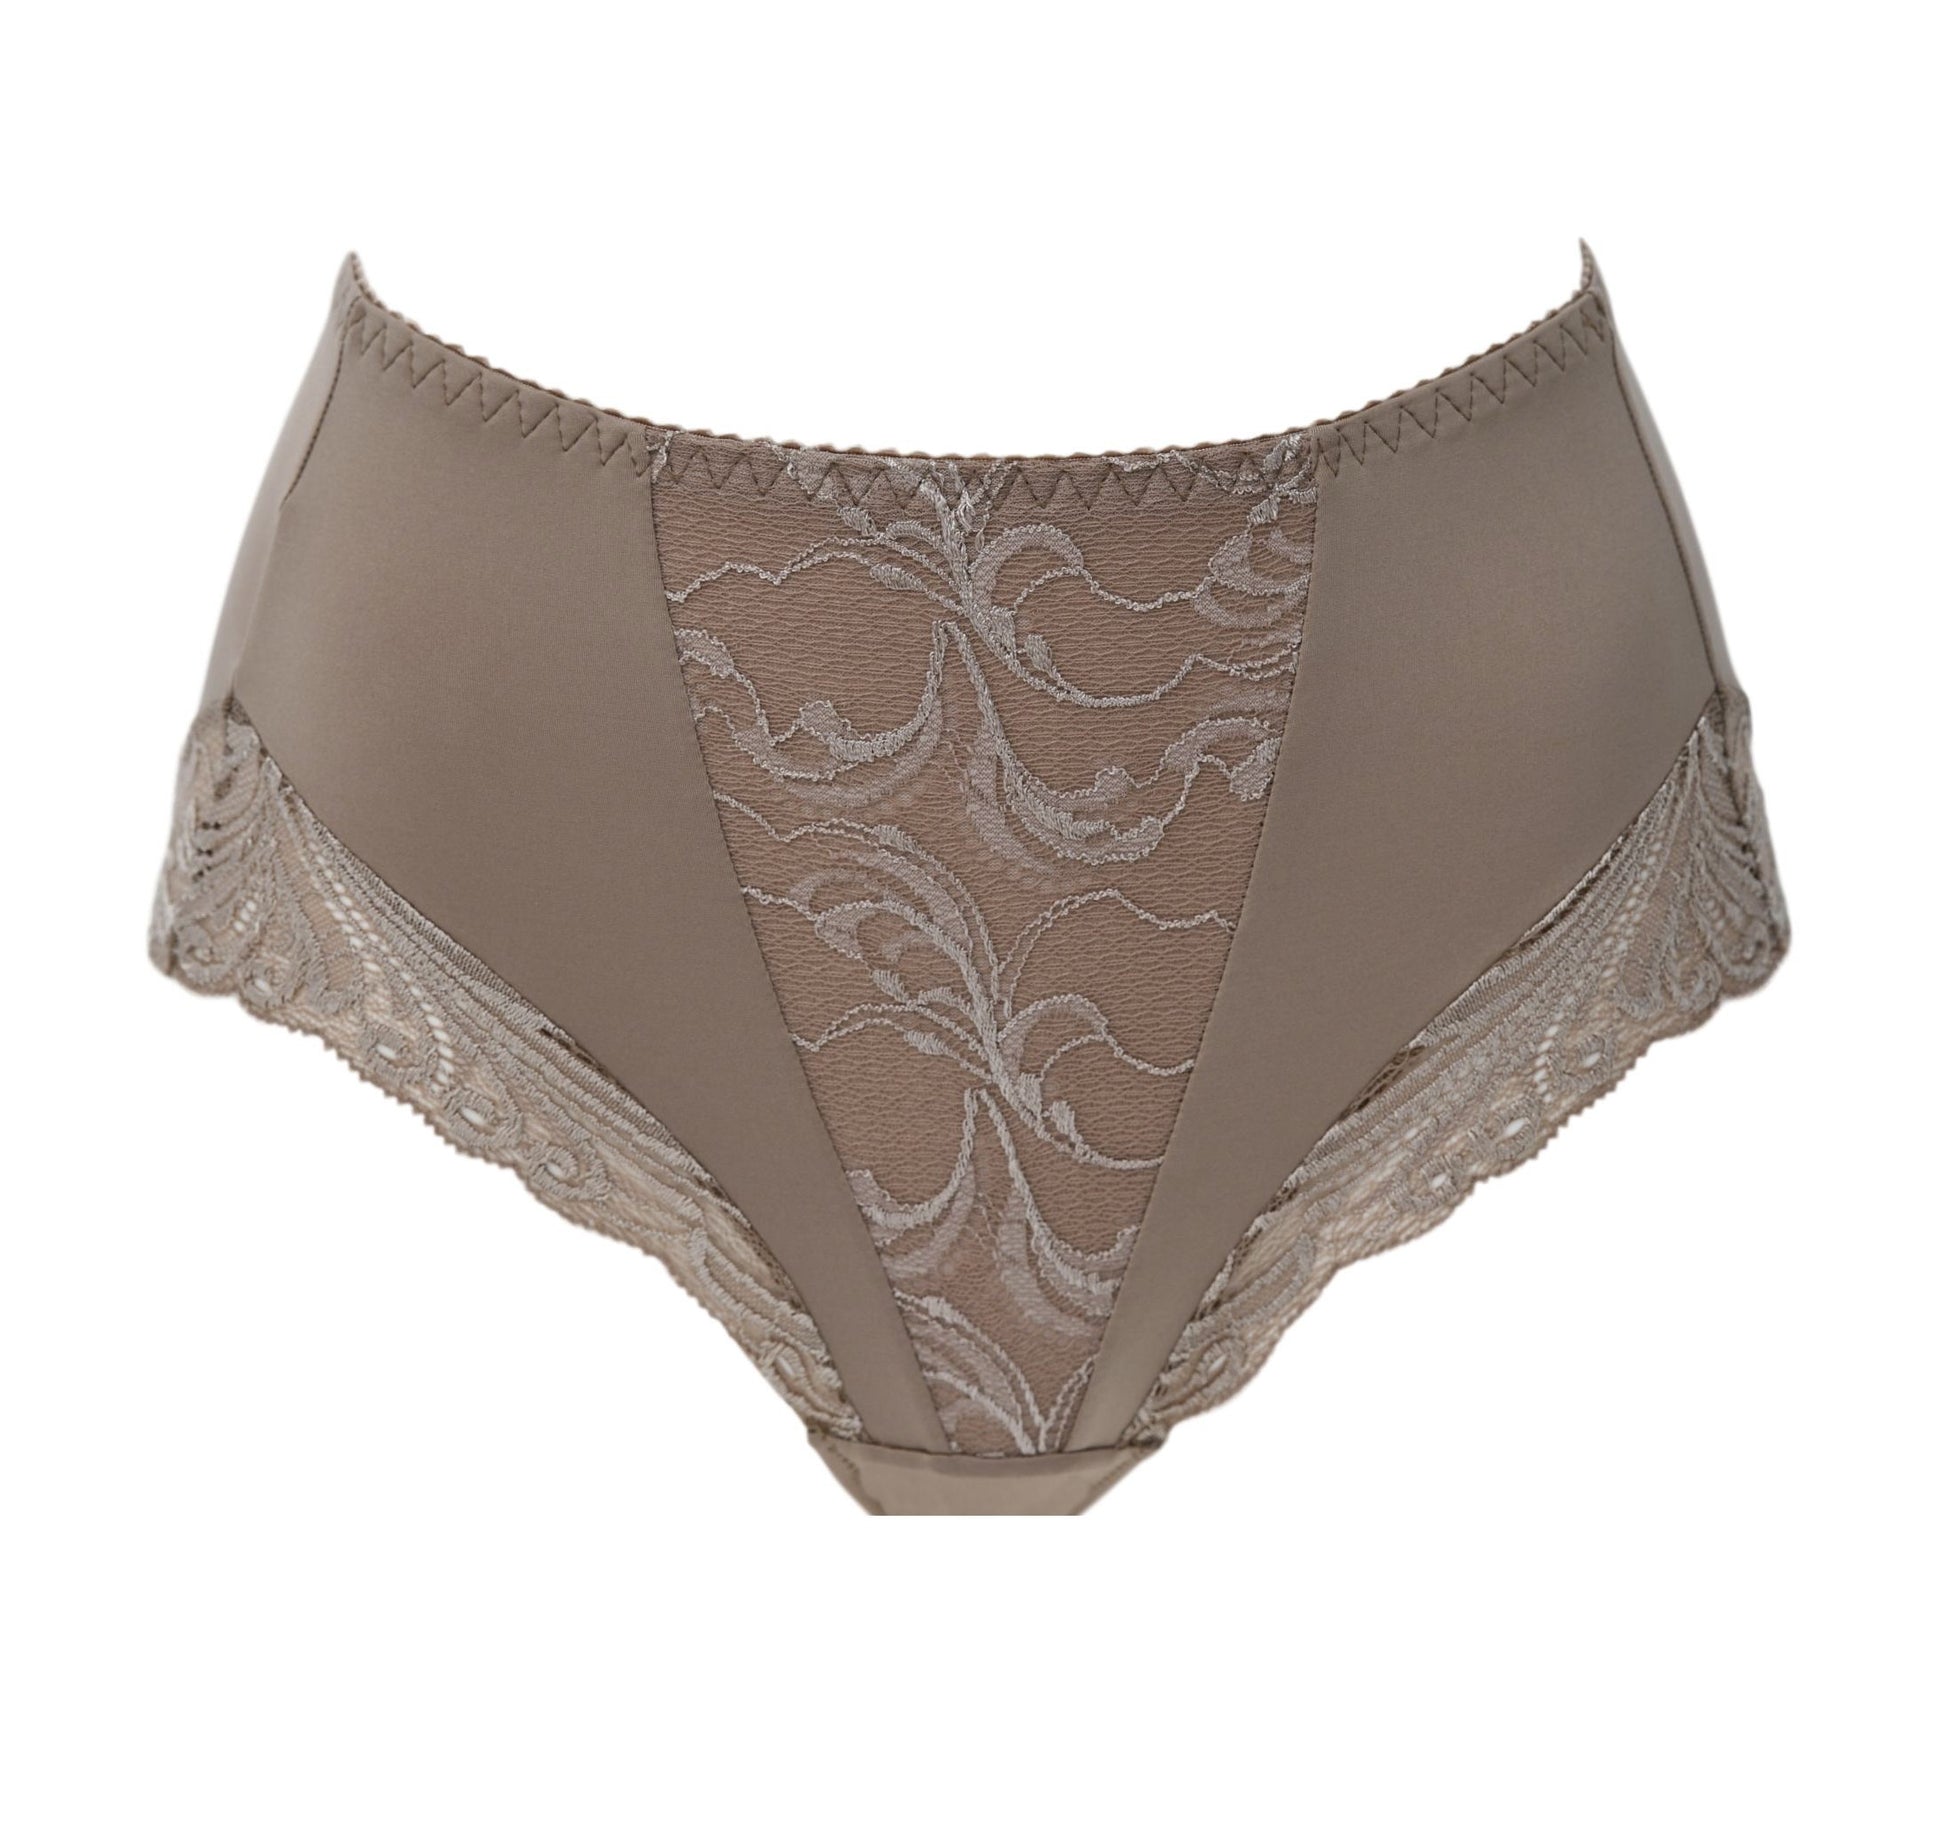 Leilieve's Savoir Faire line boasts this Full Brief, crafted with an ideal fit and sensation. An Italian flat lace limits transparency while an ultra-soft microfiber fabric lends a luxurious aesthetic and tactile experience.